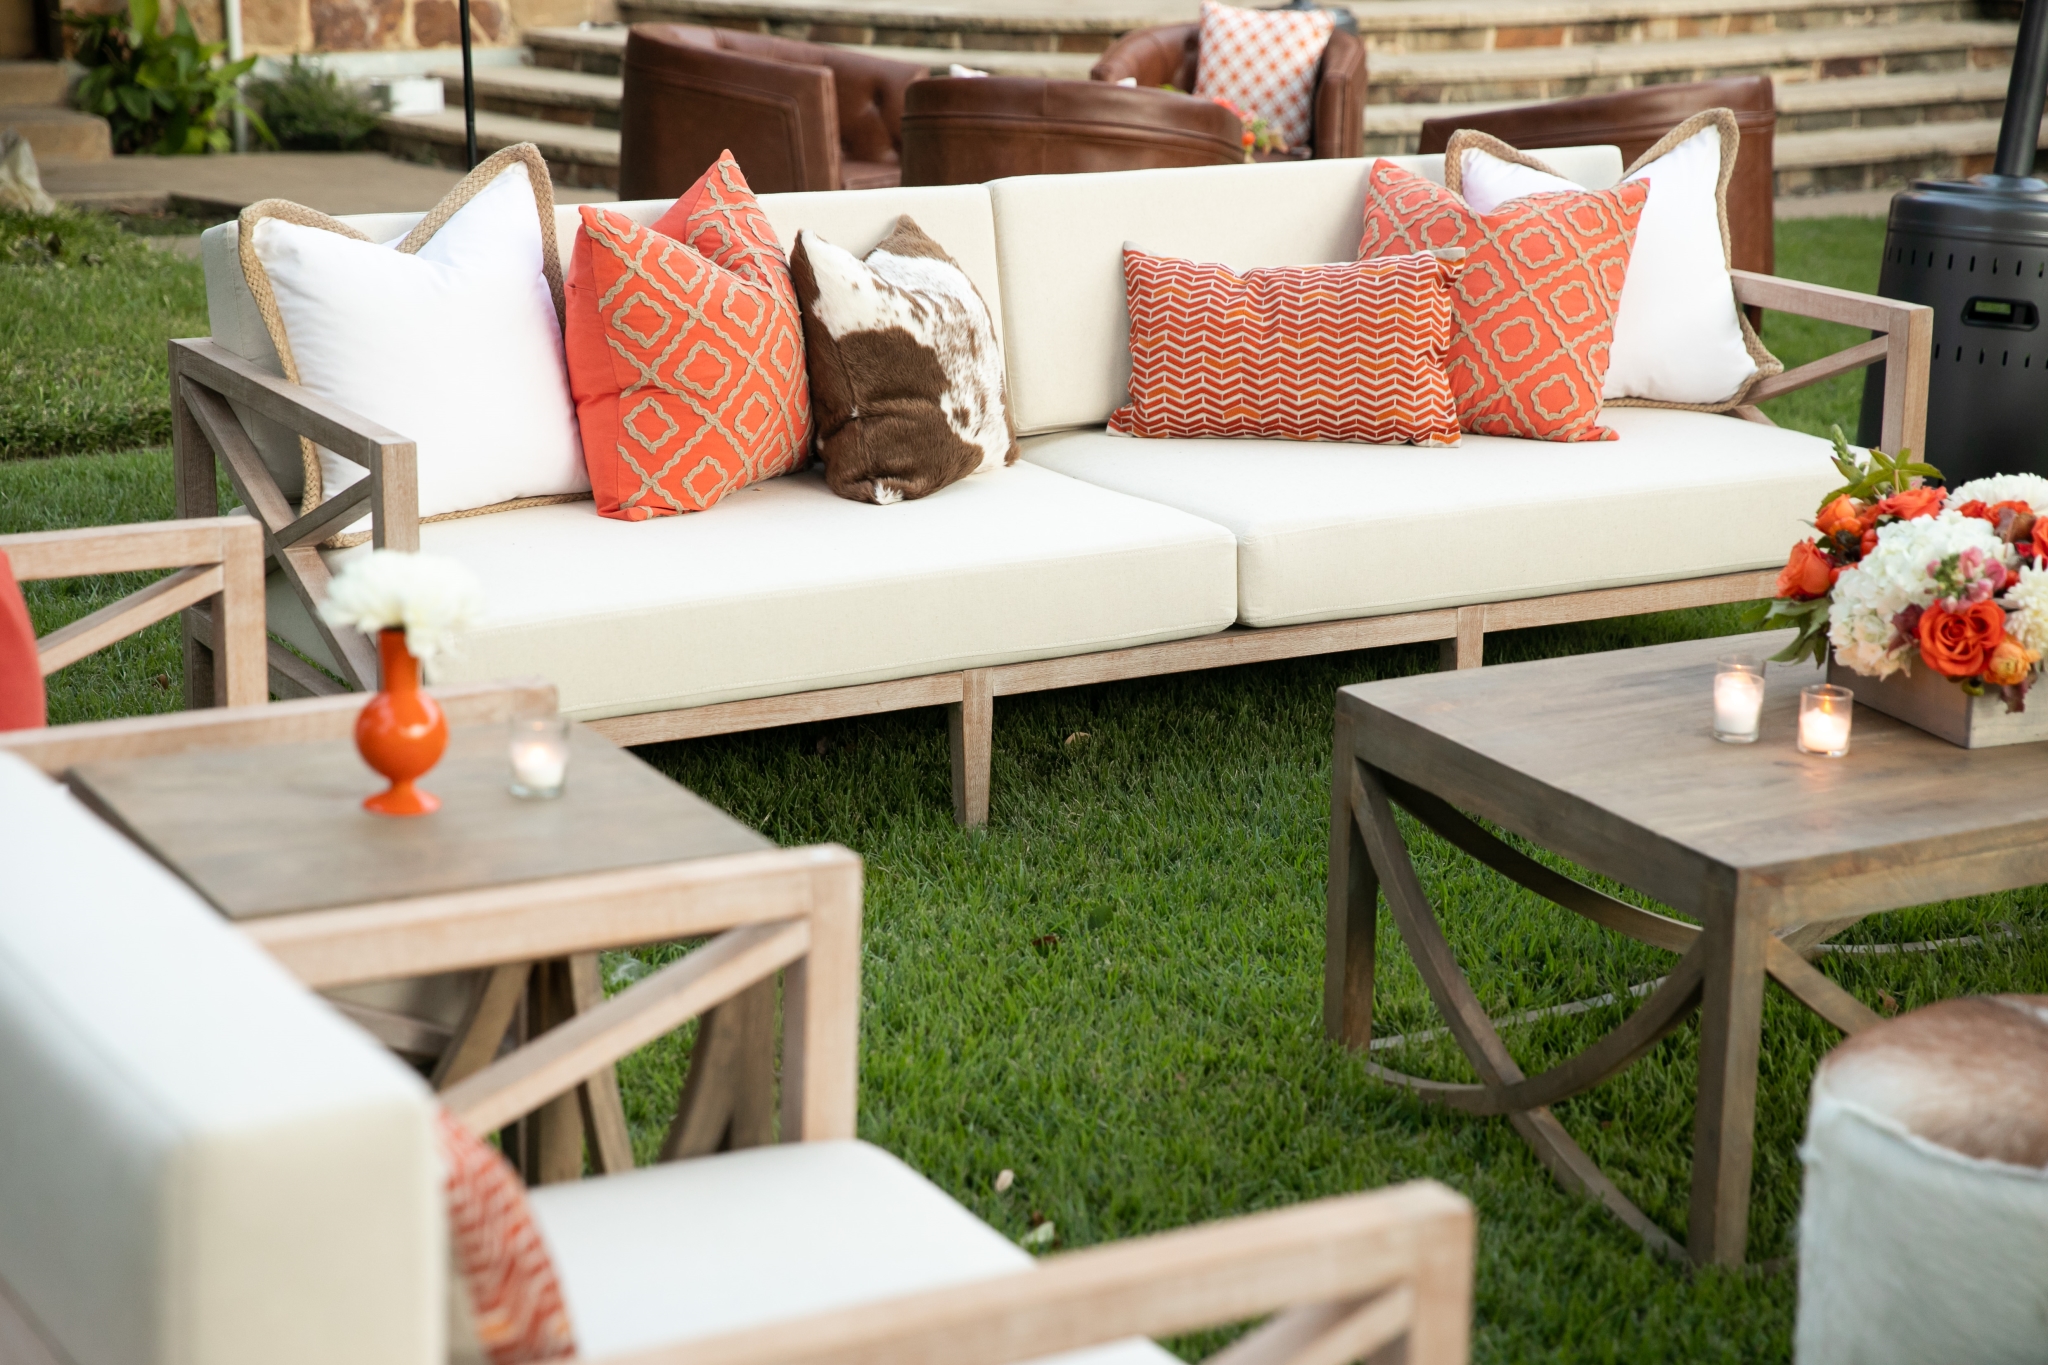 Planning and Design for Outdoor Spaces